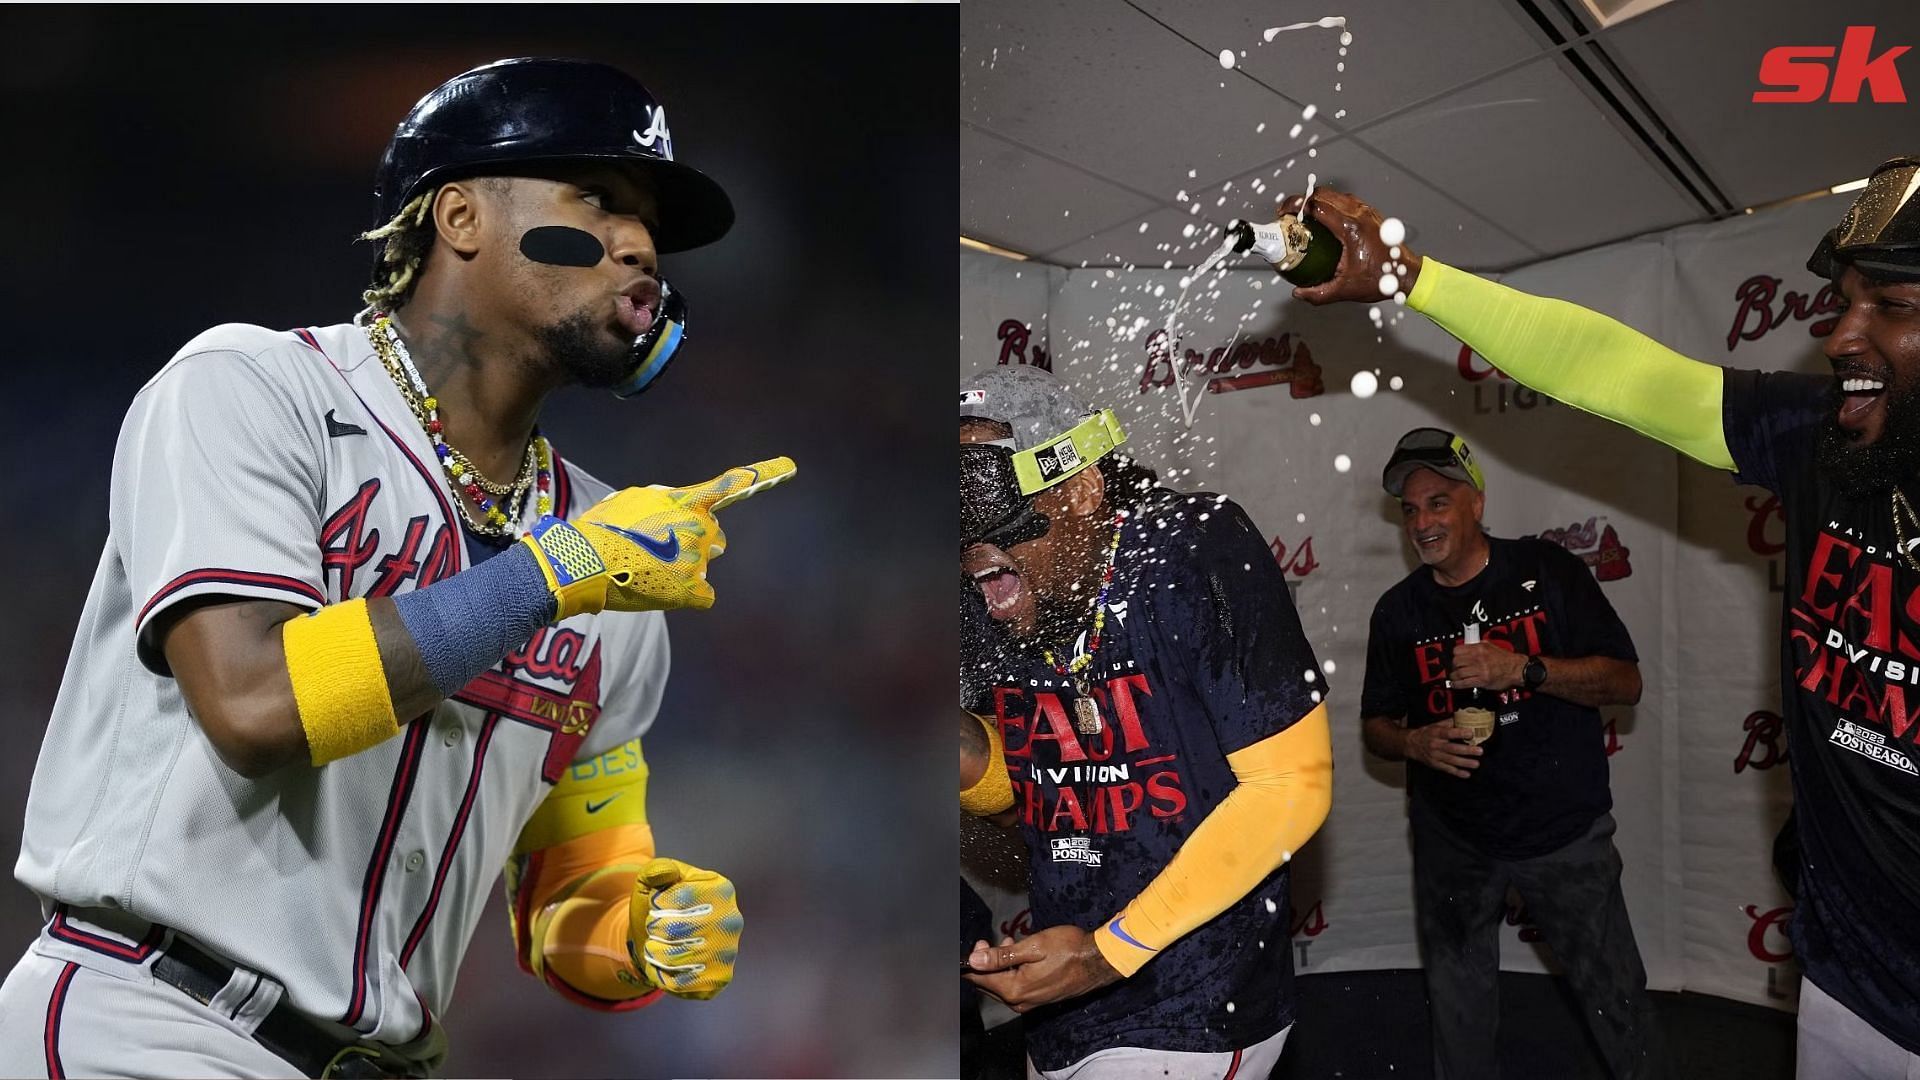 WATCH: Ronald Acuna Jr. embraces the hate showered by Phillies fans after winning NL East 